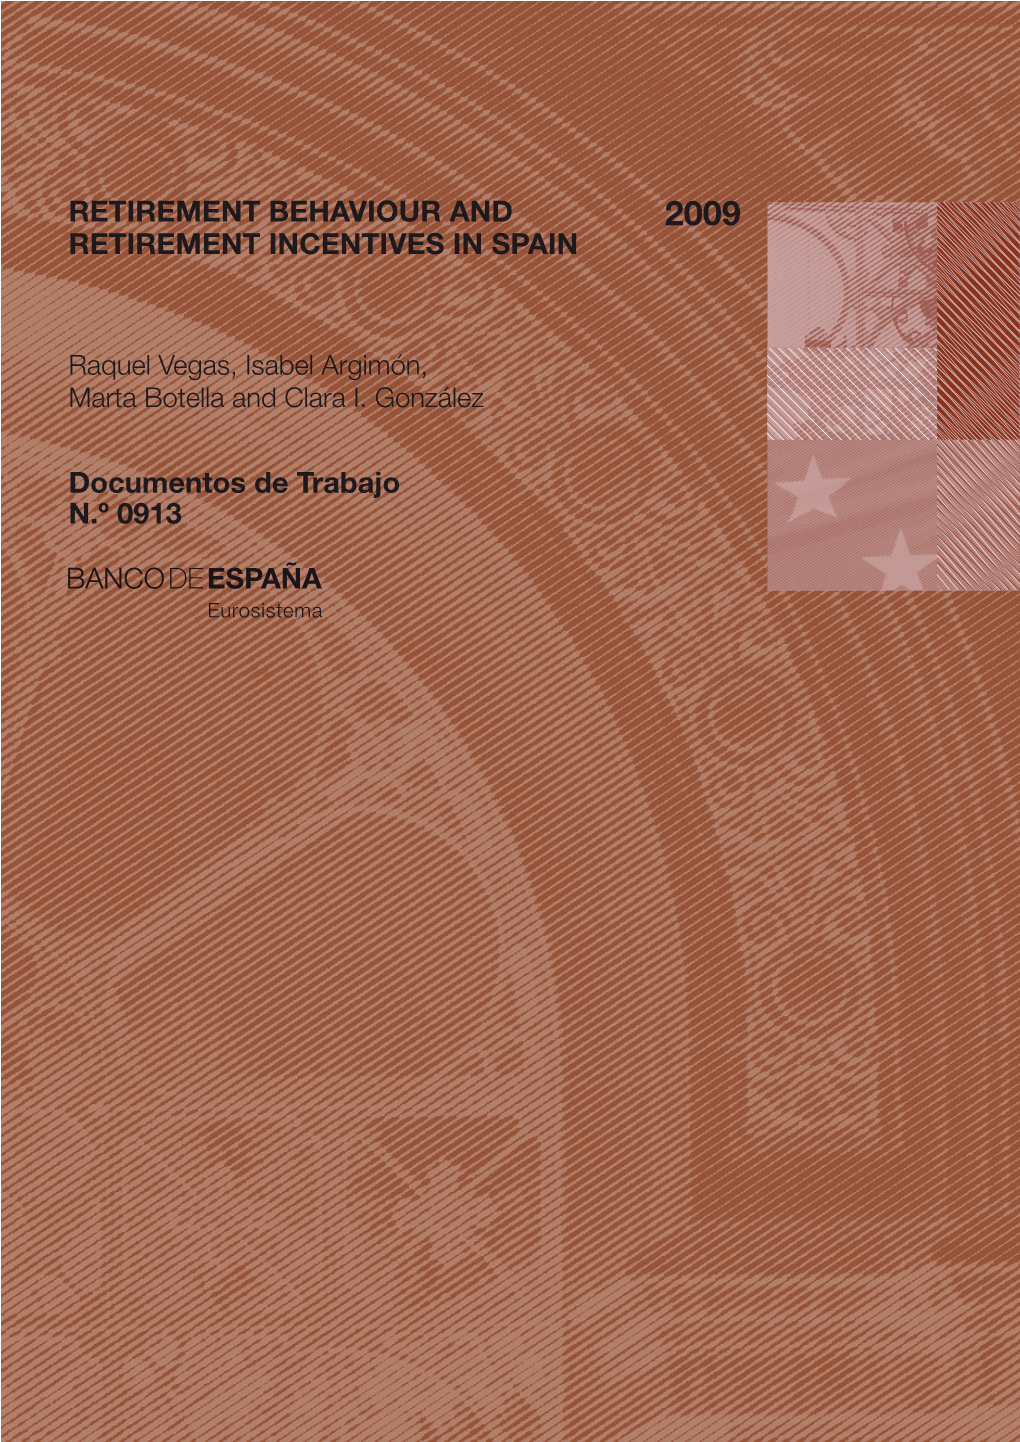 Retirement Behaviour and Retirement Incentives in Spain Retirement Behaviour and Retirement Incentives in Spain(*)